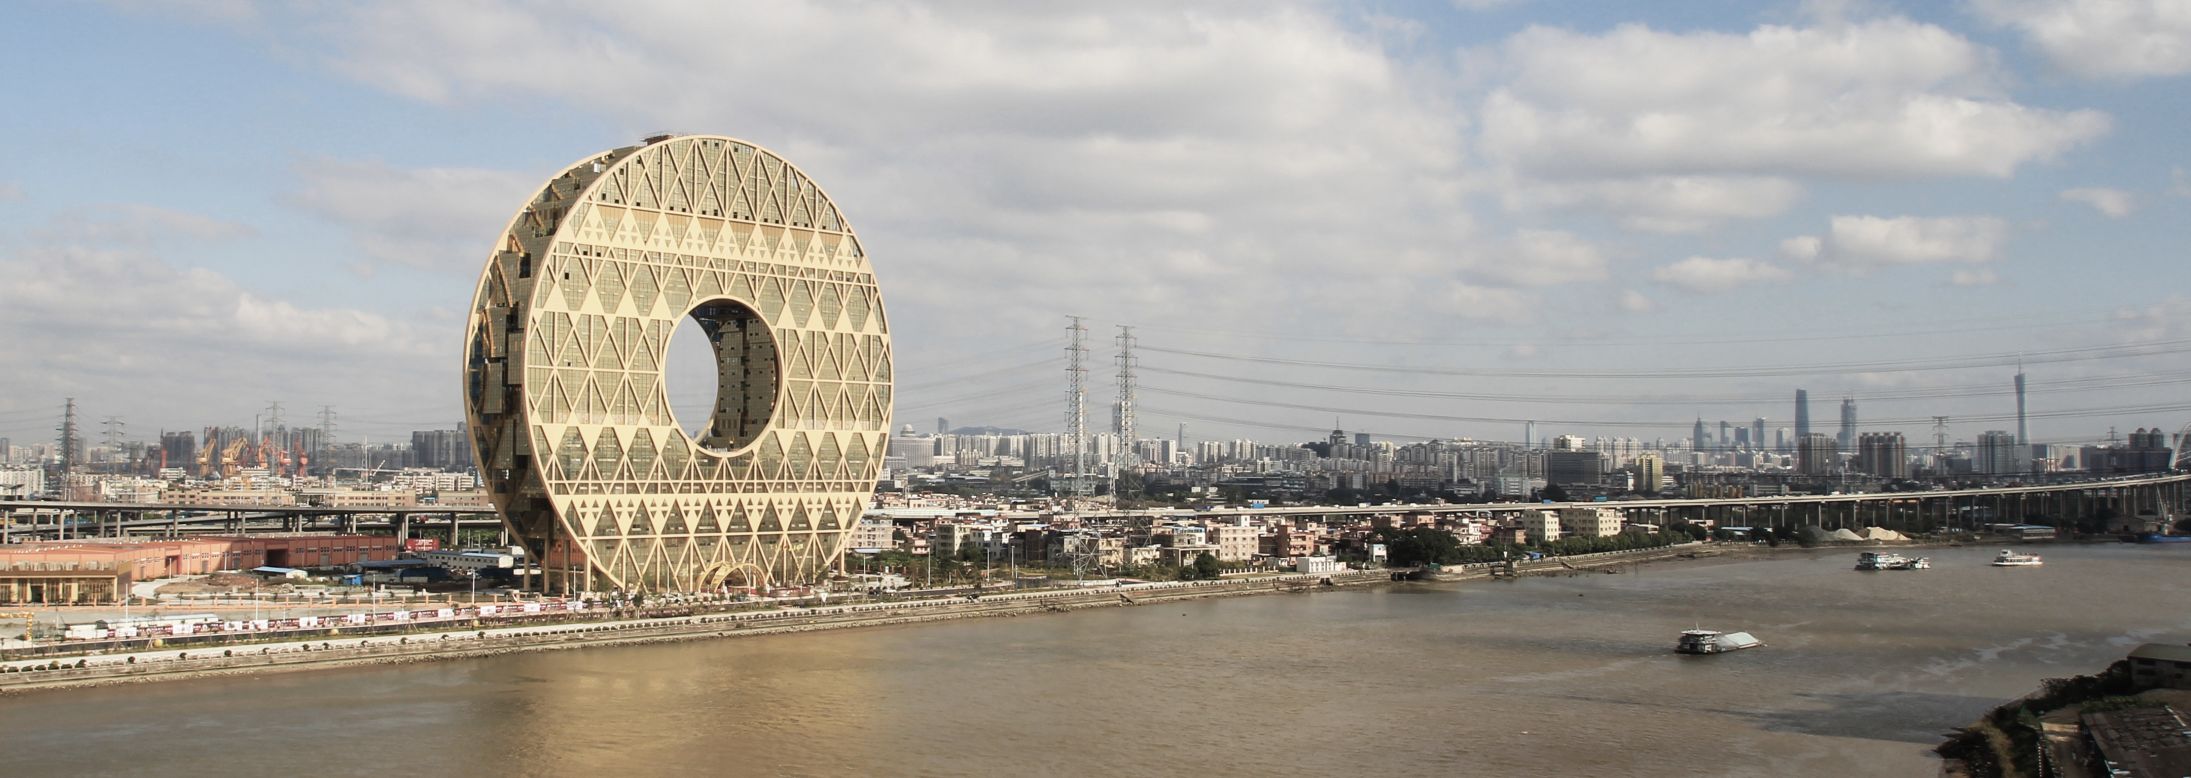 Other memorable architectural designs already realized in China include the Guangzhou Circle, home to the Guangdong Plastic Exchange. According to Italian architecture firm A.M. Progetti, the design is inspired by ancient jade discs.